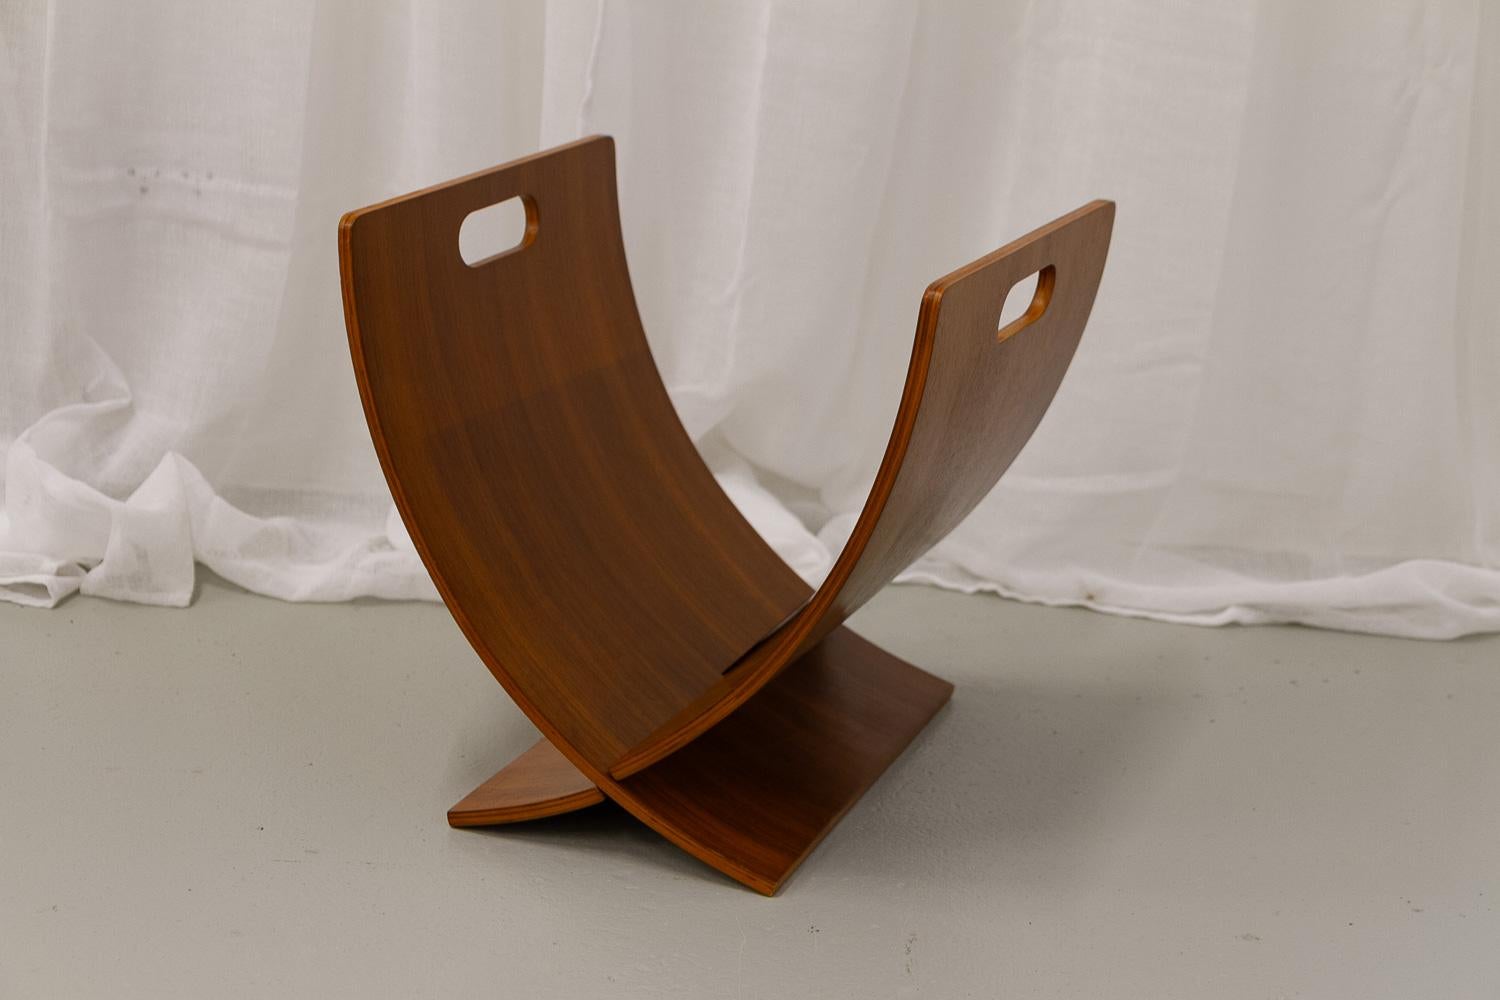 Danish Modern Walnut Magazine Rack, 1970s.
Mid-Century Modern magazine stand made in Denmark in the 1970. Two slotted leaves of plywood fits together to form a freestanding magazine rack. 
Good original condition. Patina consistent with age and use.